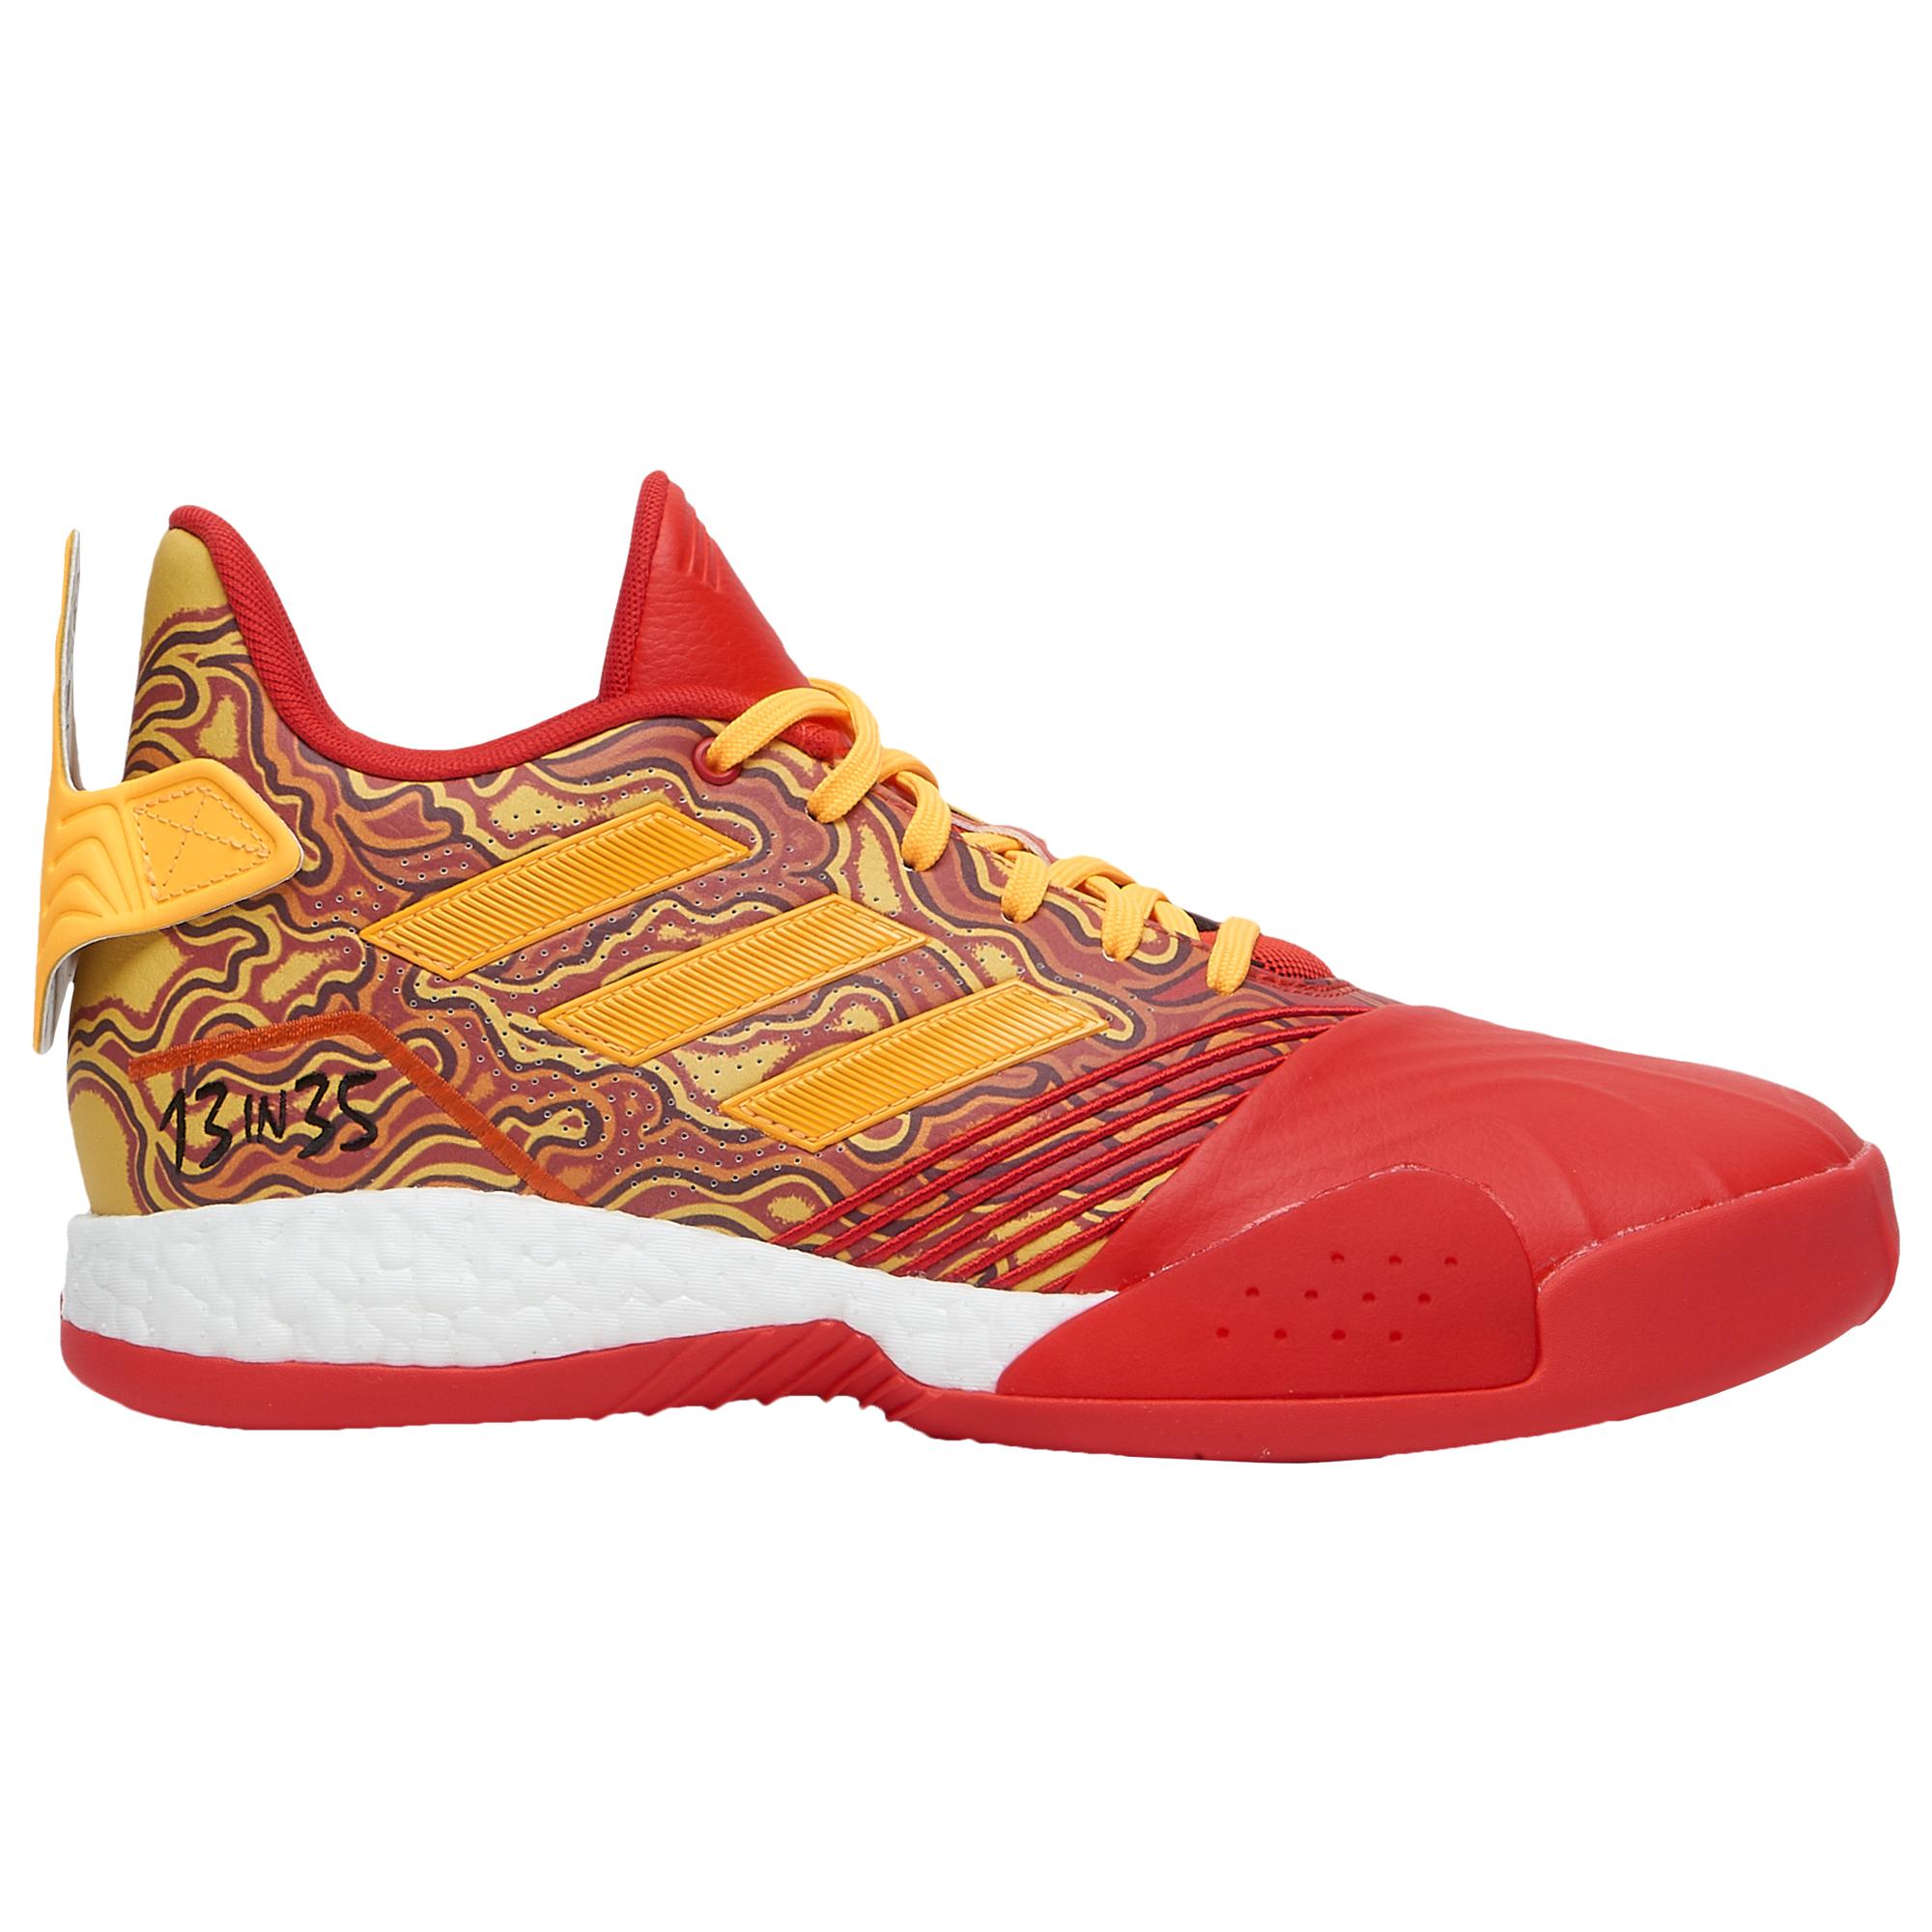 adidas Synthetic Tracy Mcgrady Tmac Millenium - Basketball Shoes in ...